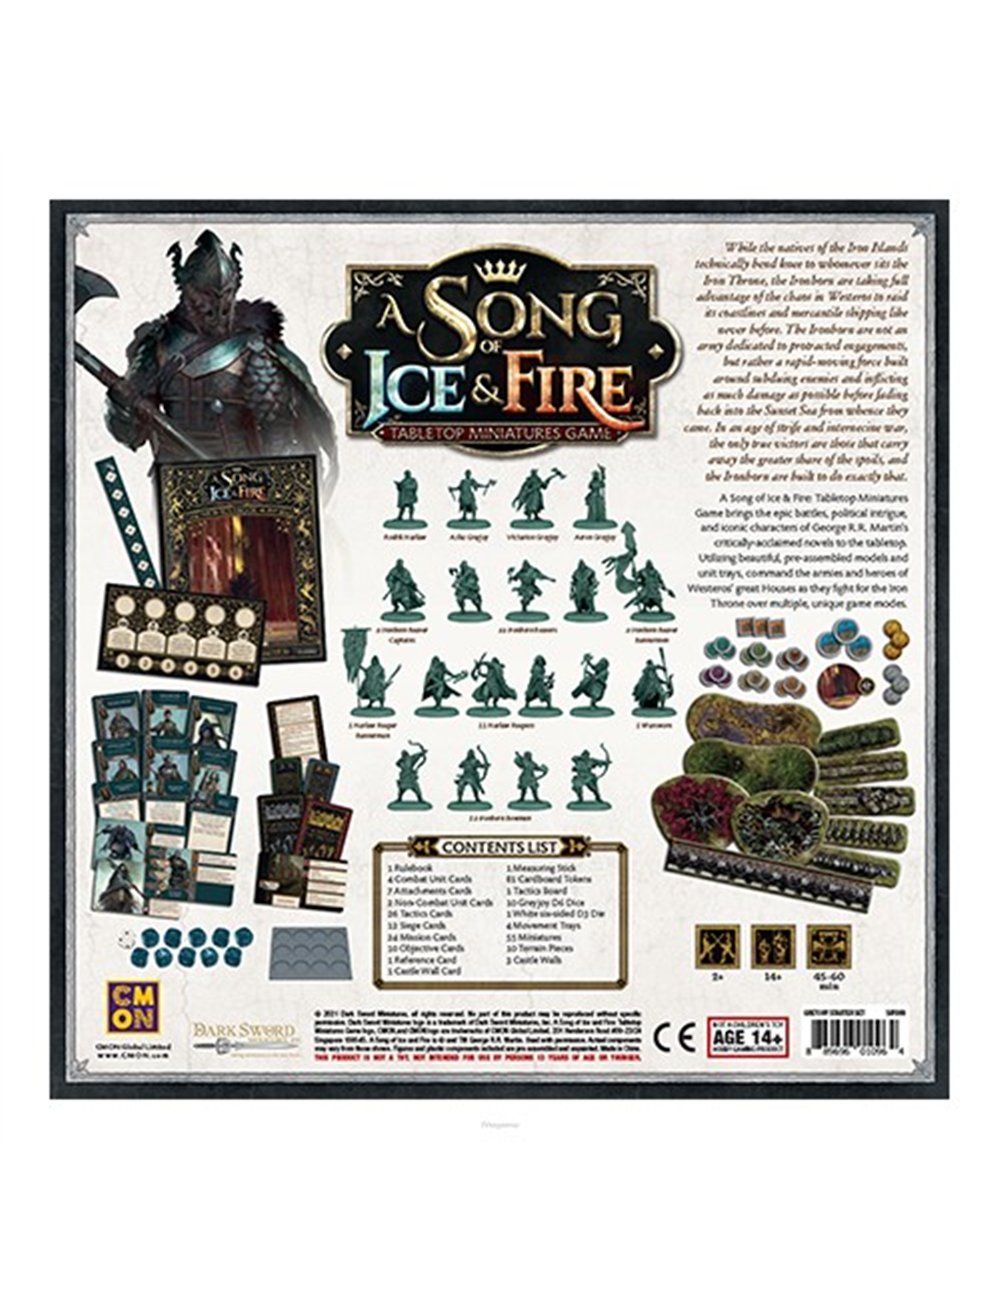 A SONG OF ICE & FIRE - Greyjoy Starter Set PL